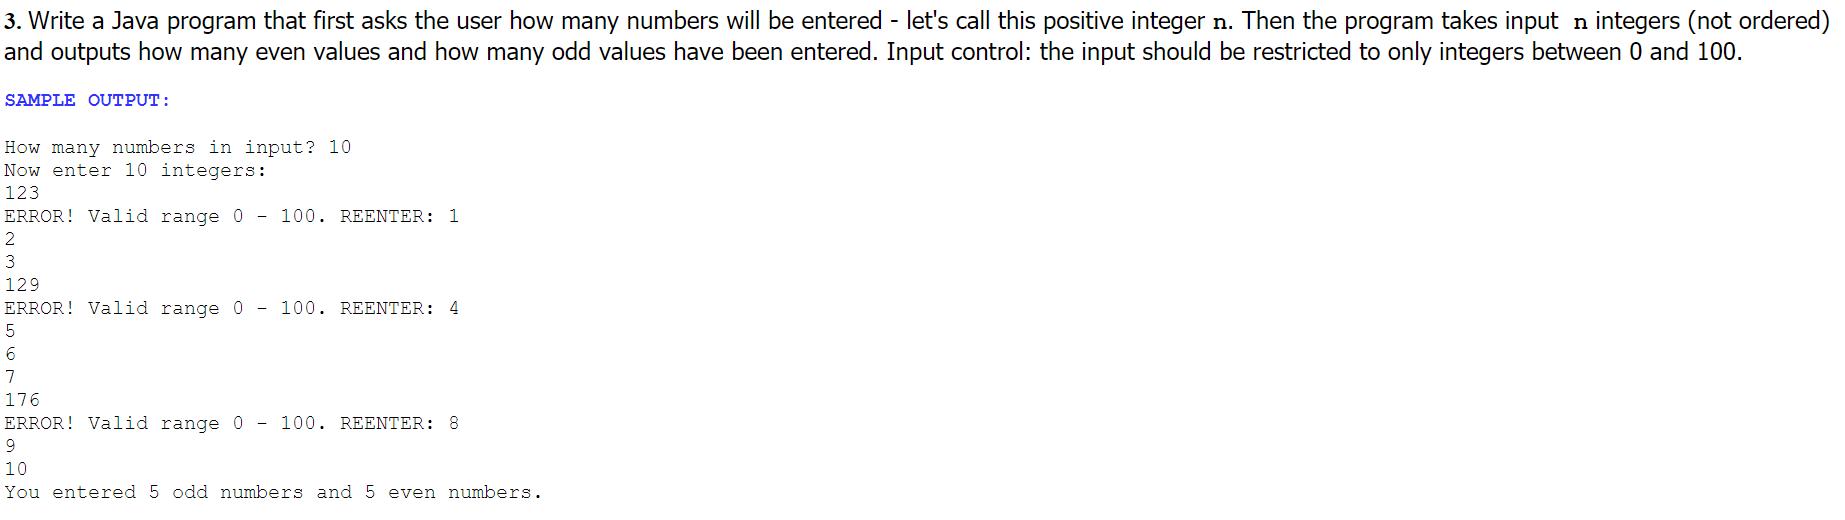 3. Write a Java program that first asks the user how many numbers will be entered - let's call this positive